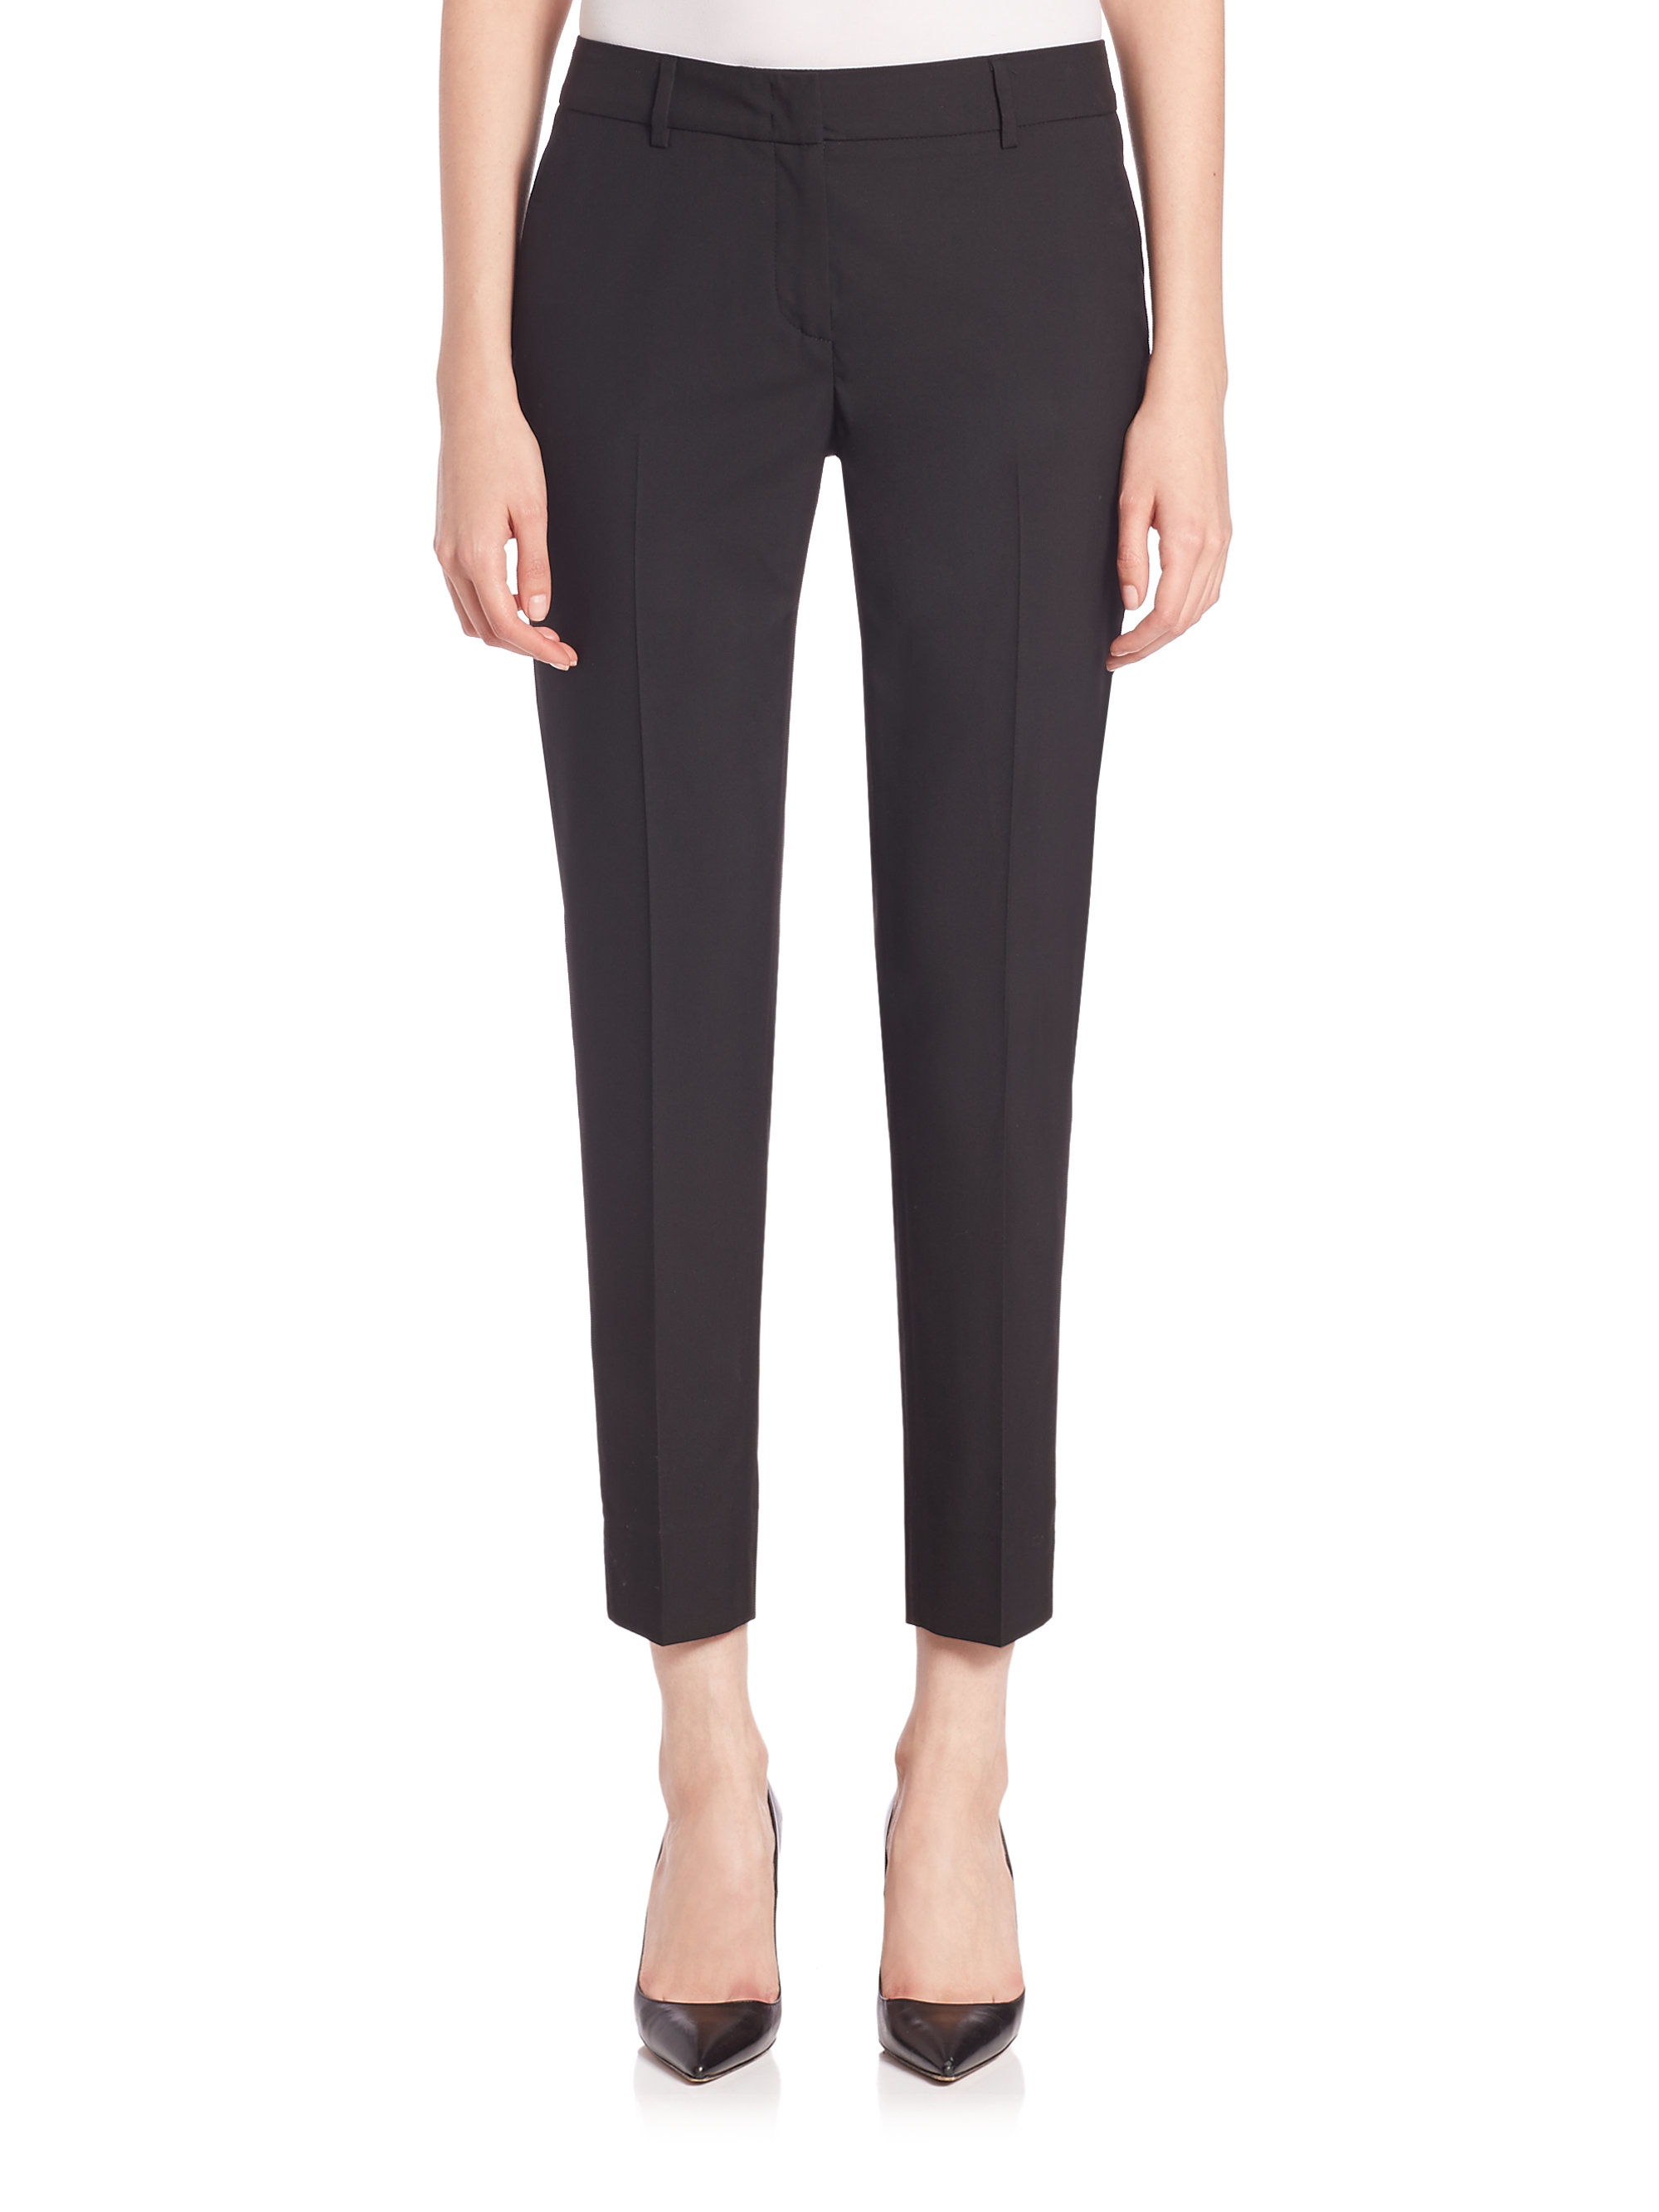 Lyst - Peserico Lightweight Tailored Pants in Black